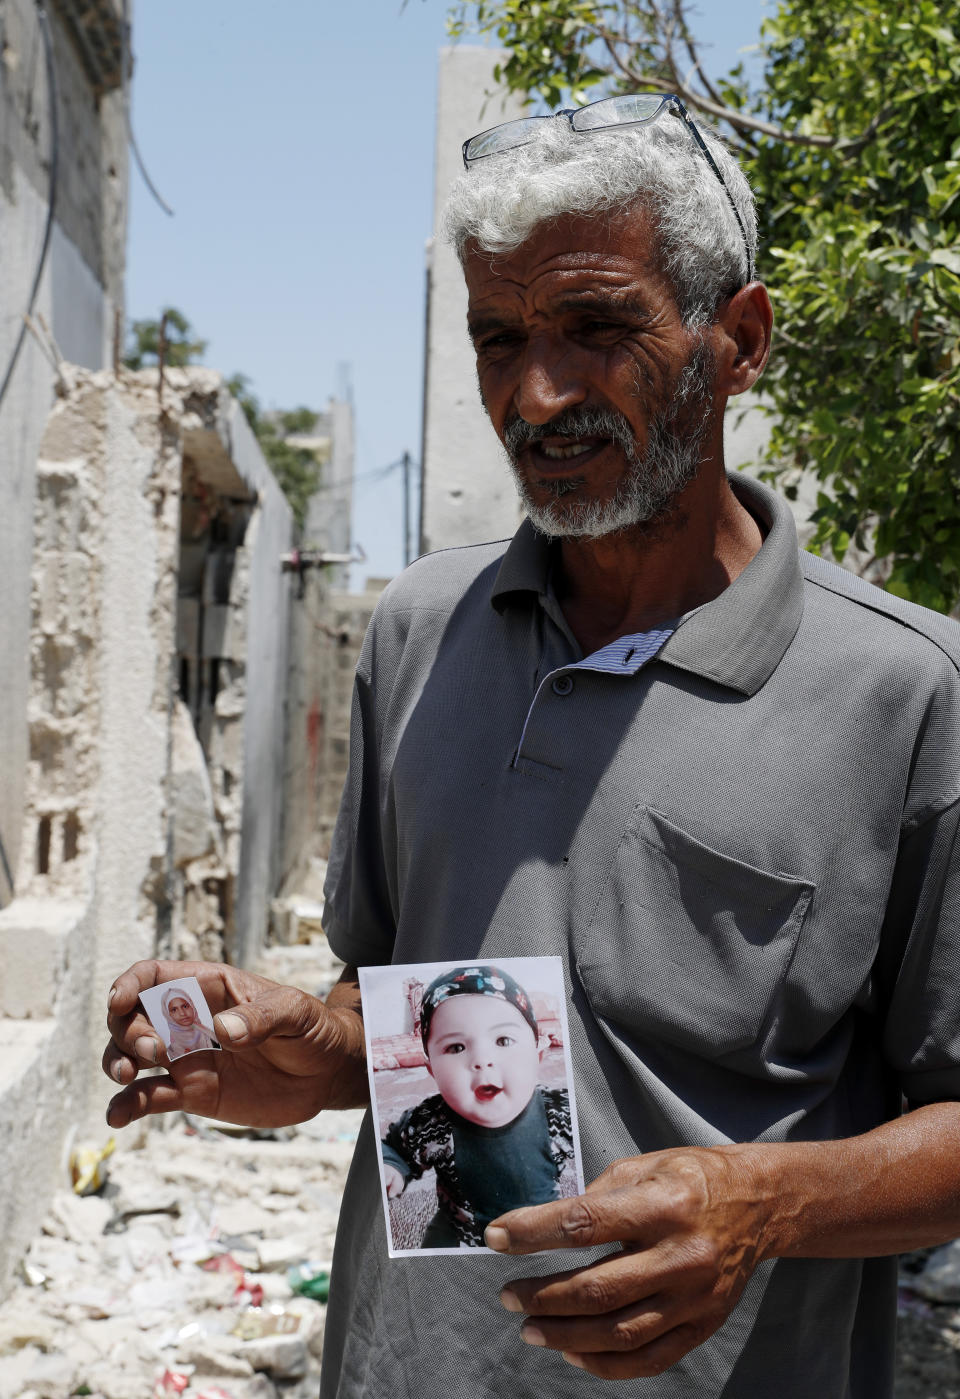 Nasser Abu Fares, who lost three of his daughters and his 9-month-old grandson when an Israeli artillery bombardment hit his family house during the 11-day war between Israel and Gaza's Hamas rulers in May, holds pictures of his grandson Mohammad, 9 months, and his daughter Fawziah, 17, amid the rubble of his house, at the Bedouin village of Umm Al-Nasr, outside the town of Beit Lahia, northern Gaza Strip, Wednesday, Aug. 4, 2021. After initially finding no grounds for disciplinary action, the Israeli military says it is investigating the artillery bombardment that killed six Palestinians, including an infant, in the Gaza Strip last May. (AP Photo/Adel Hana)